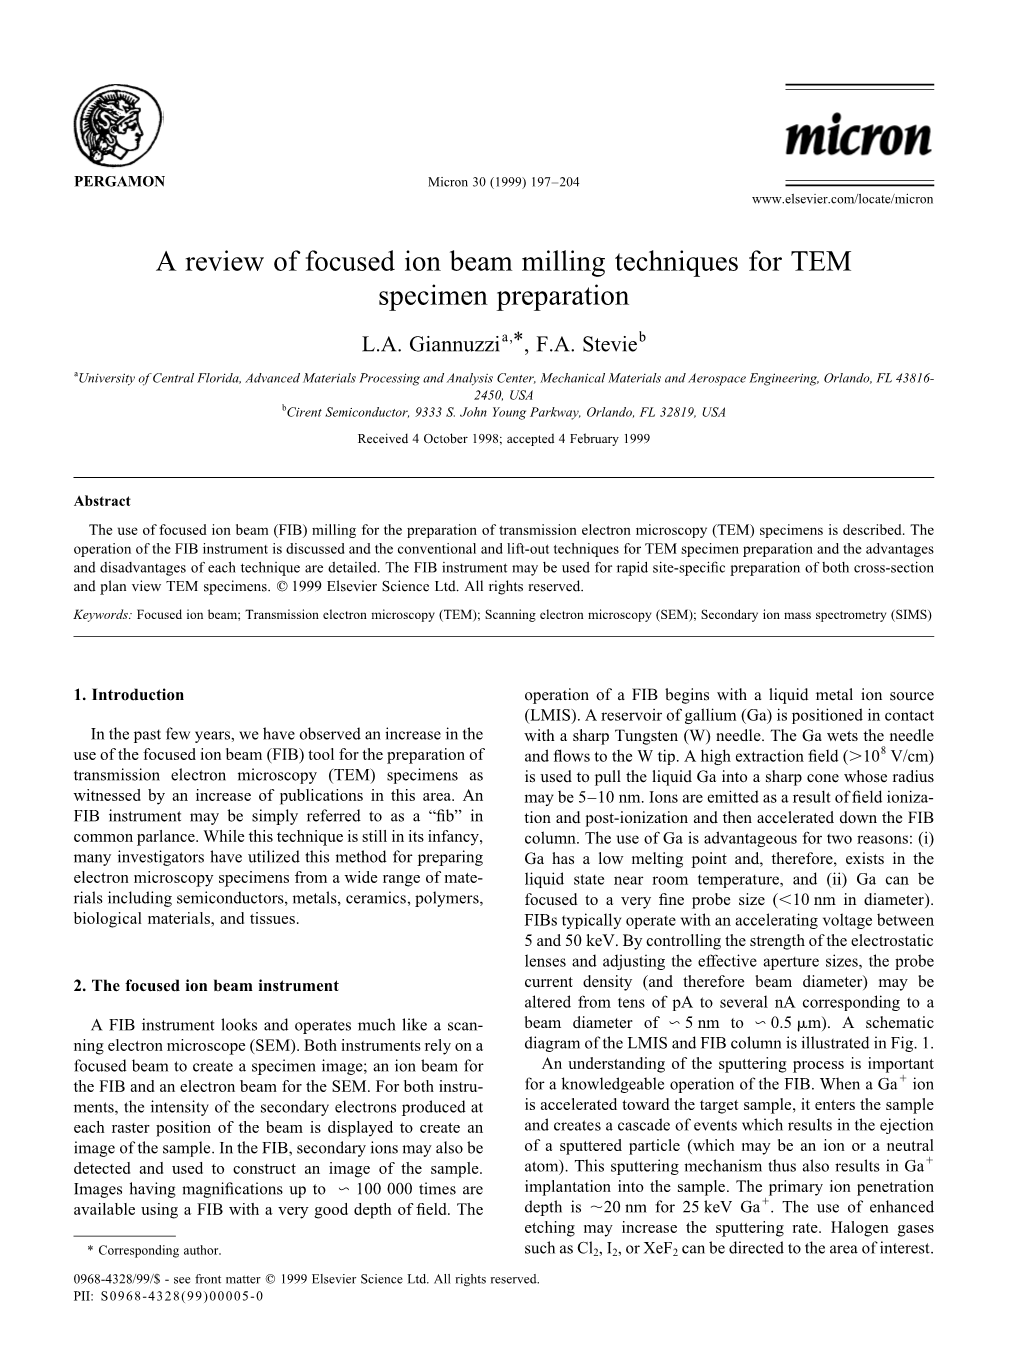 A Review of Focused Ion Beam Milling Techniques for TEM Specimen Preparation